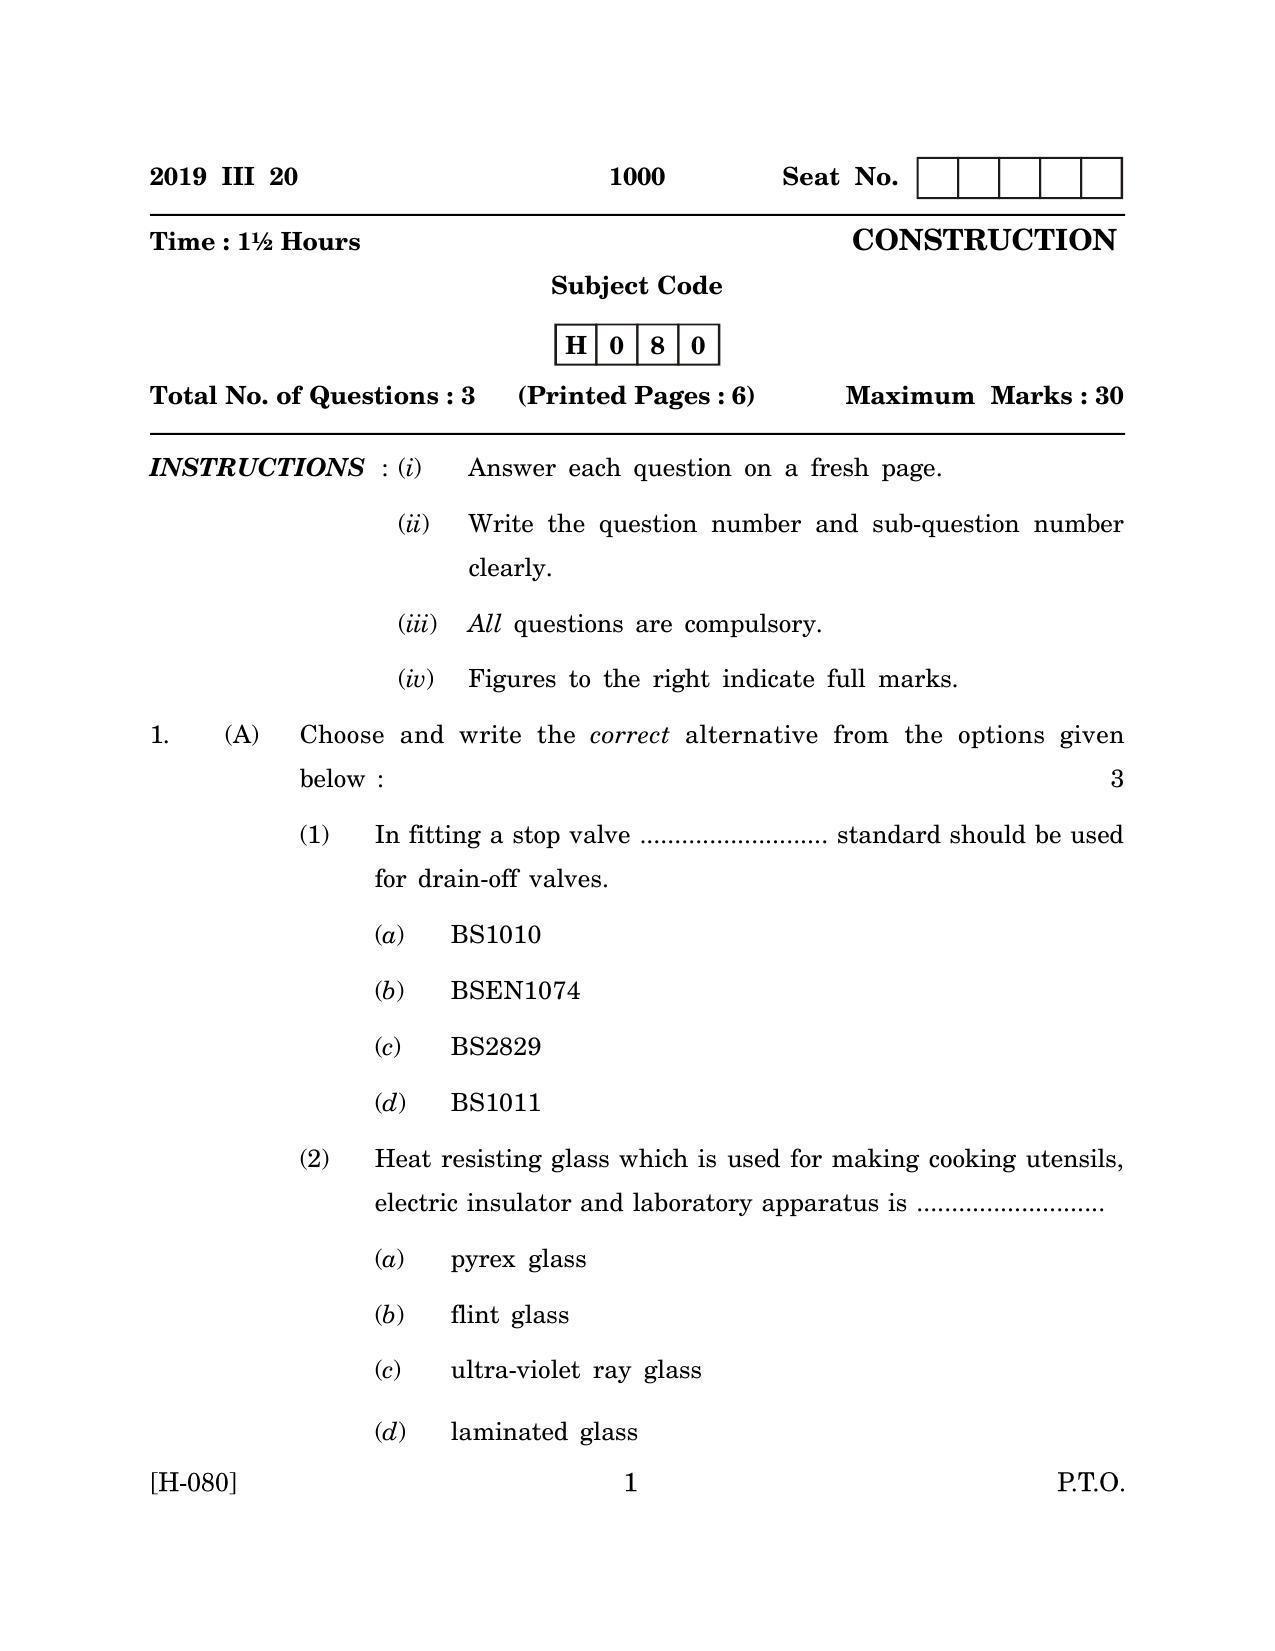 Goa Board Class 12 Construction   (March 2019) Question Paper - Page 1